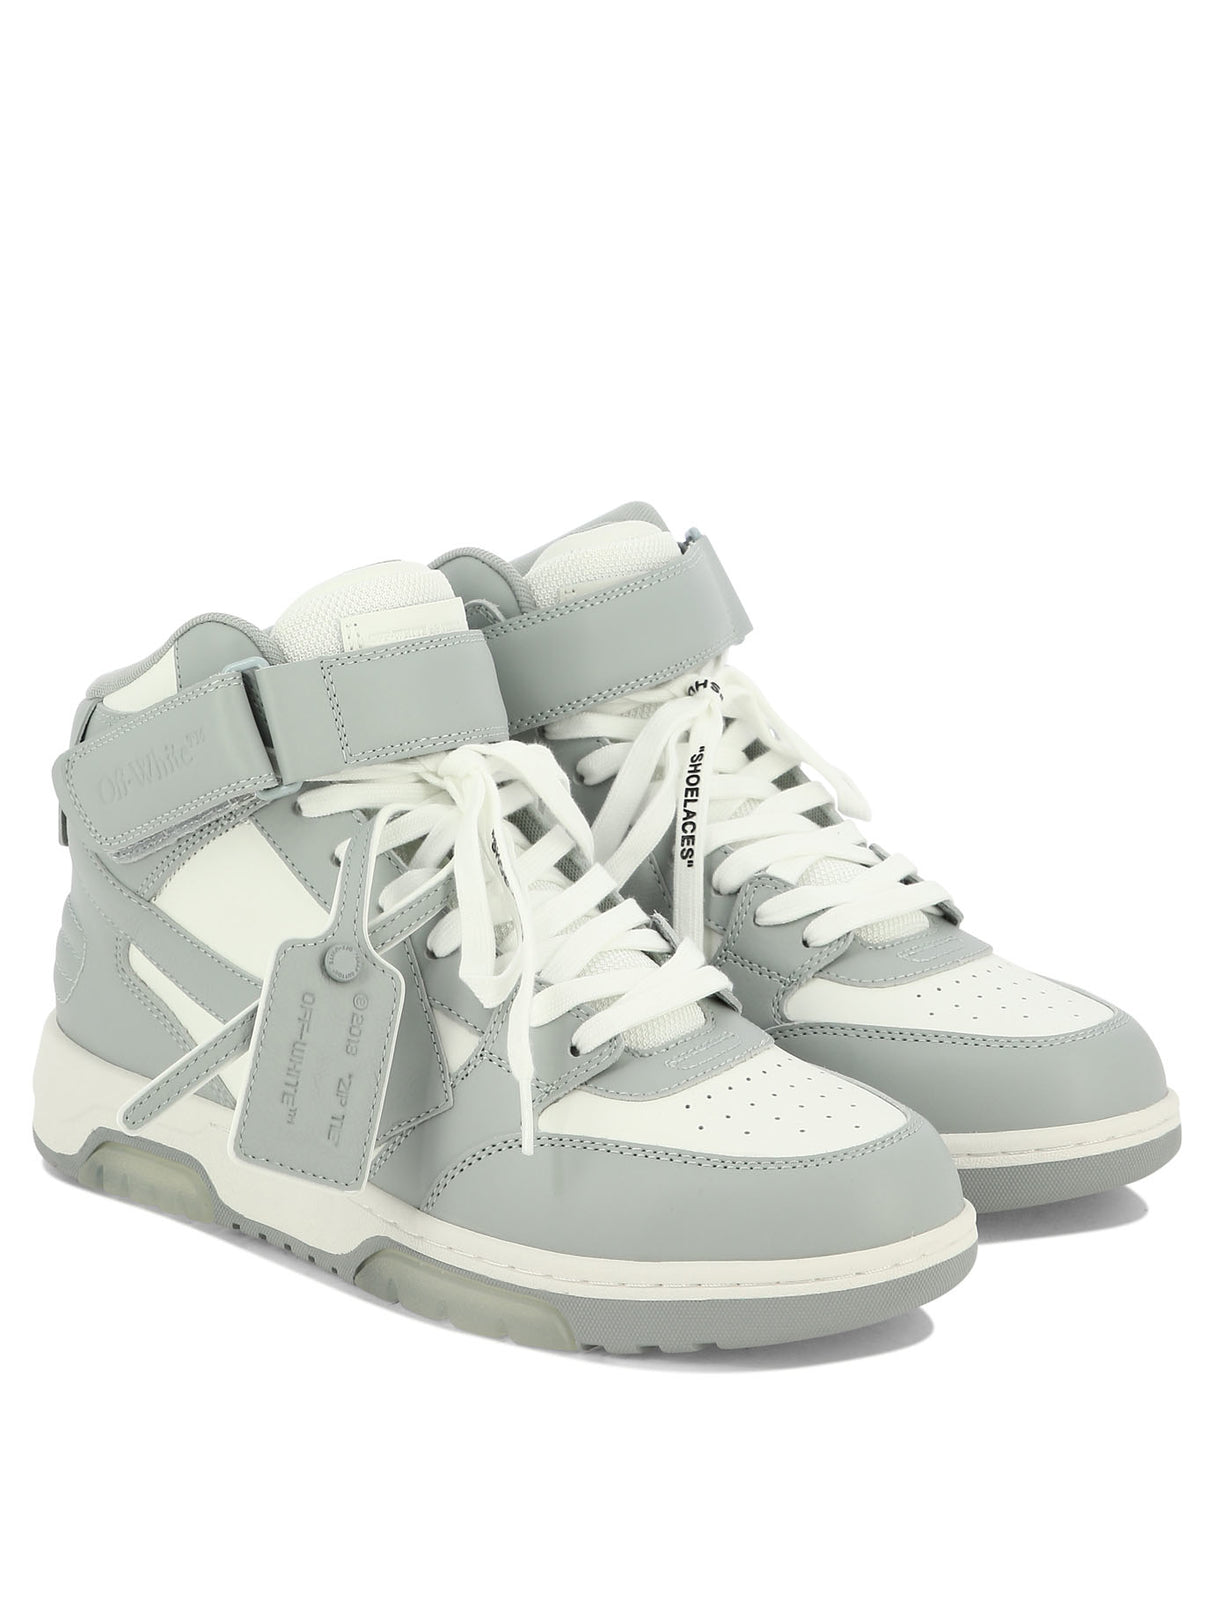 White Leather Men's Sneakers - Carryover Collection